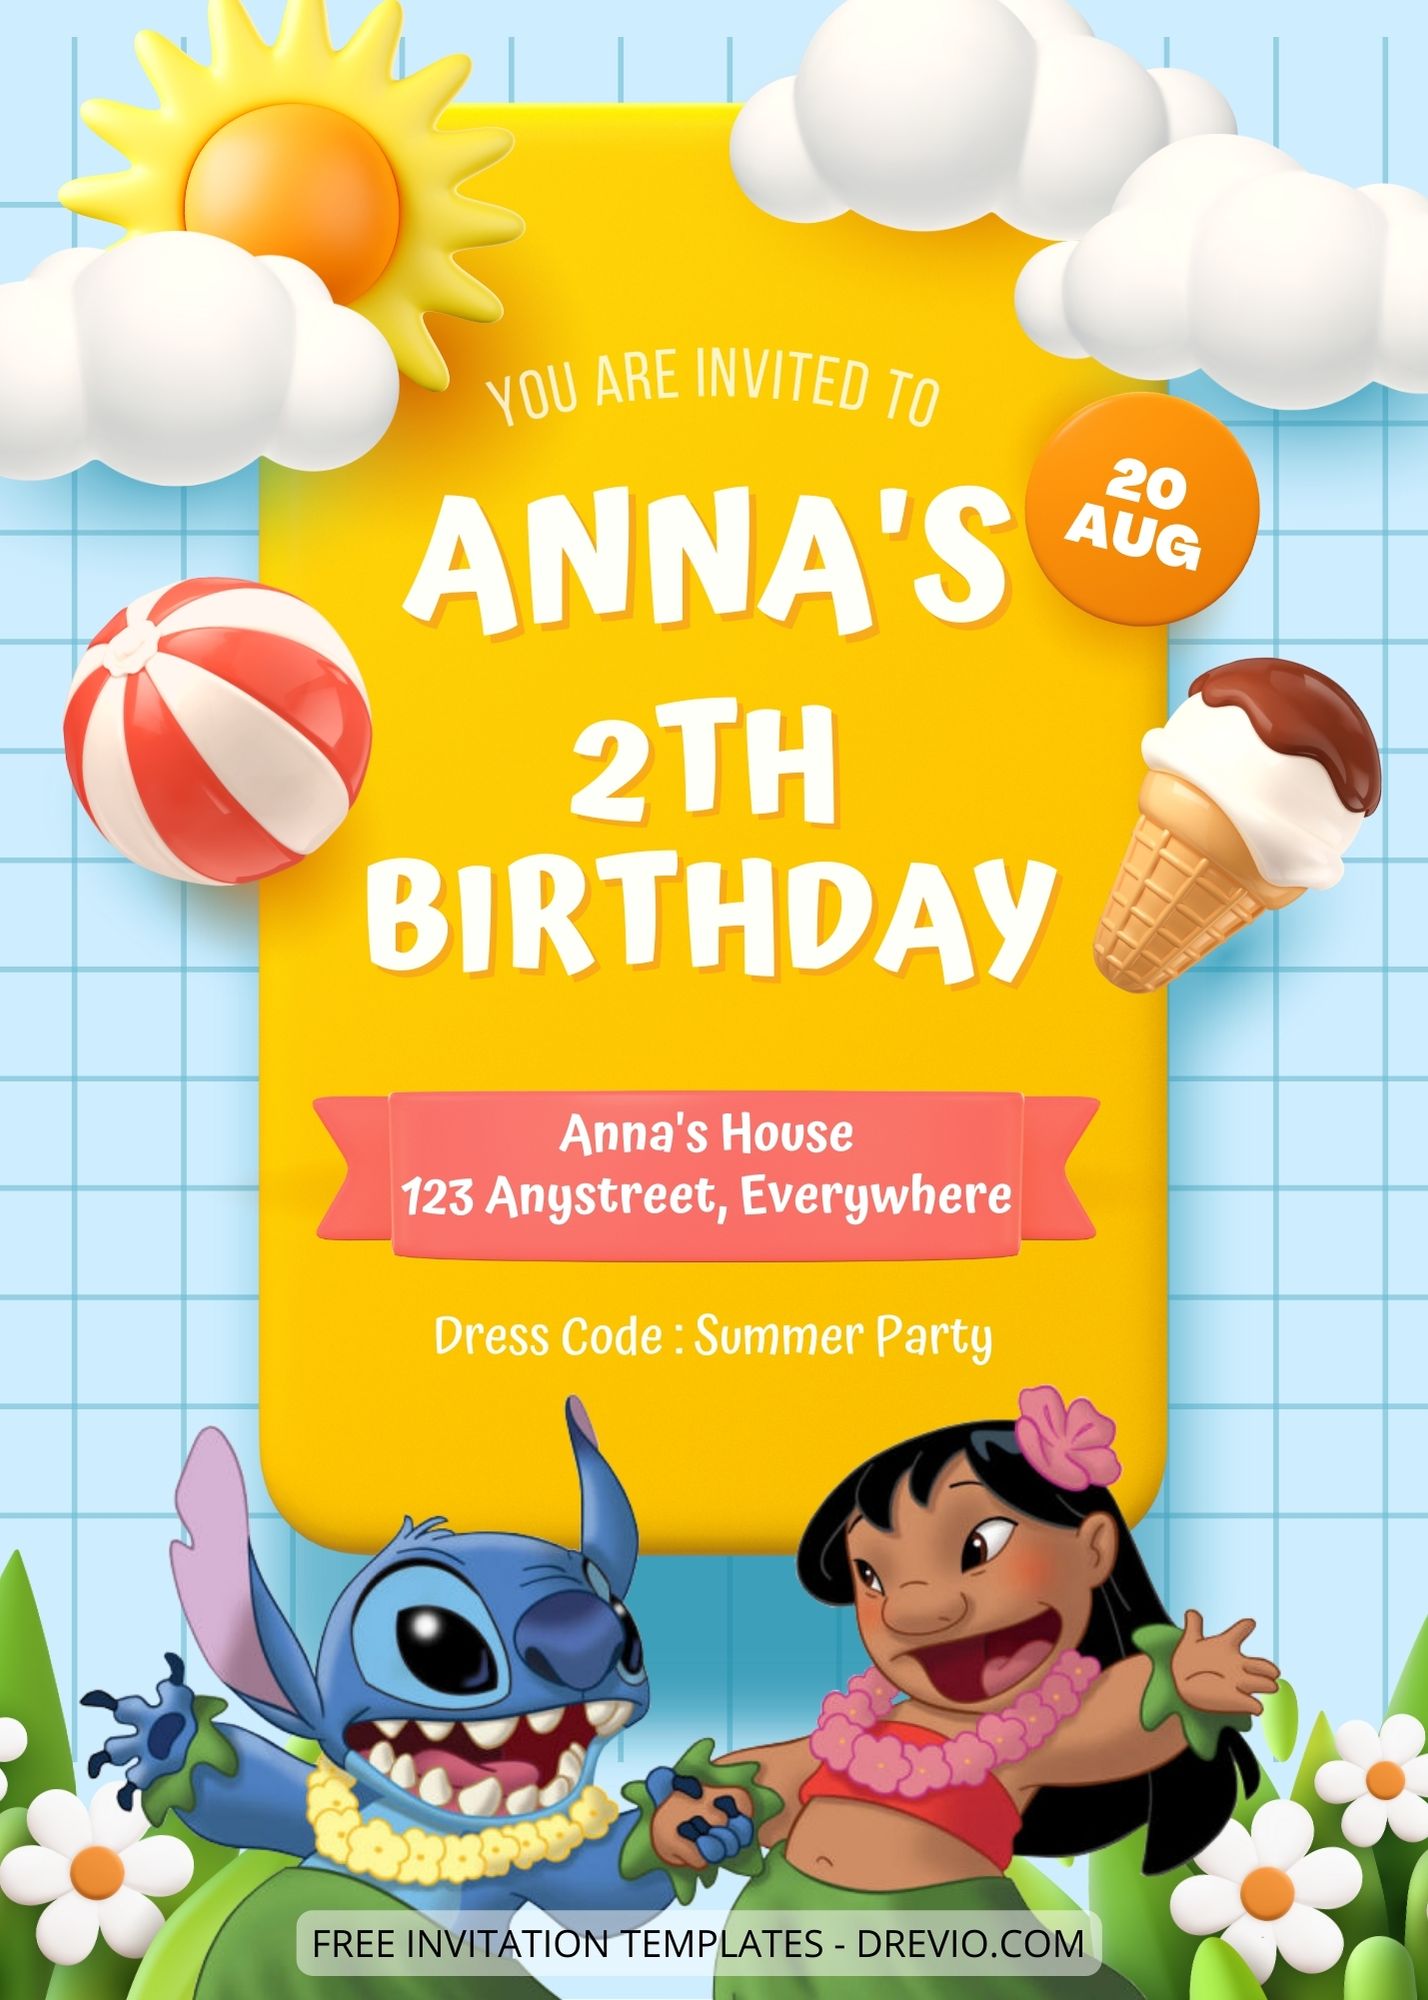 9+ Ice Cream Party Invitation Templates For Kids